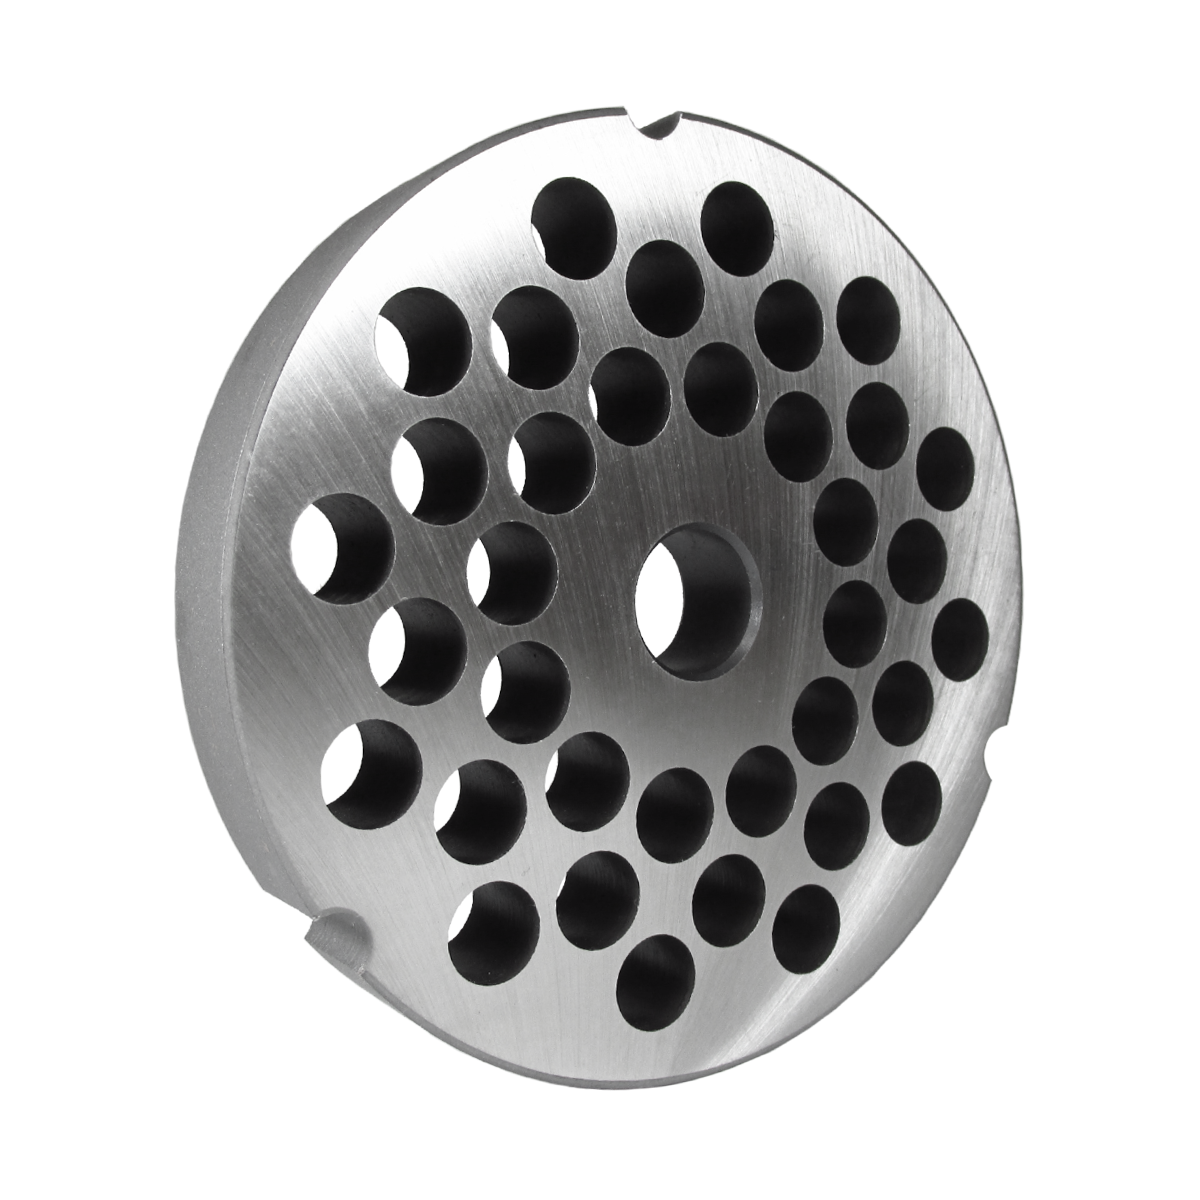 Grinder plate for #52 grinders with 3/4" hole, reversible